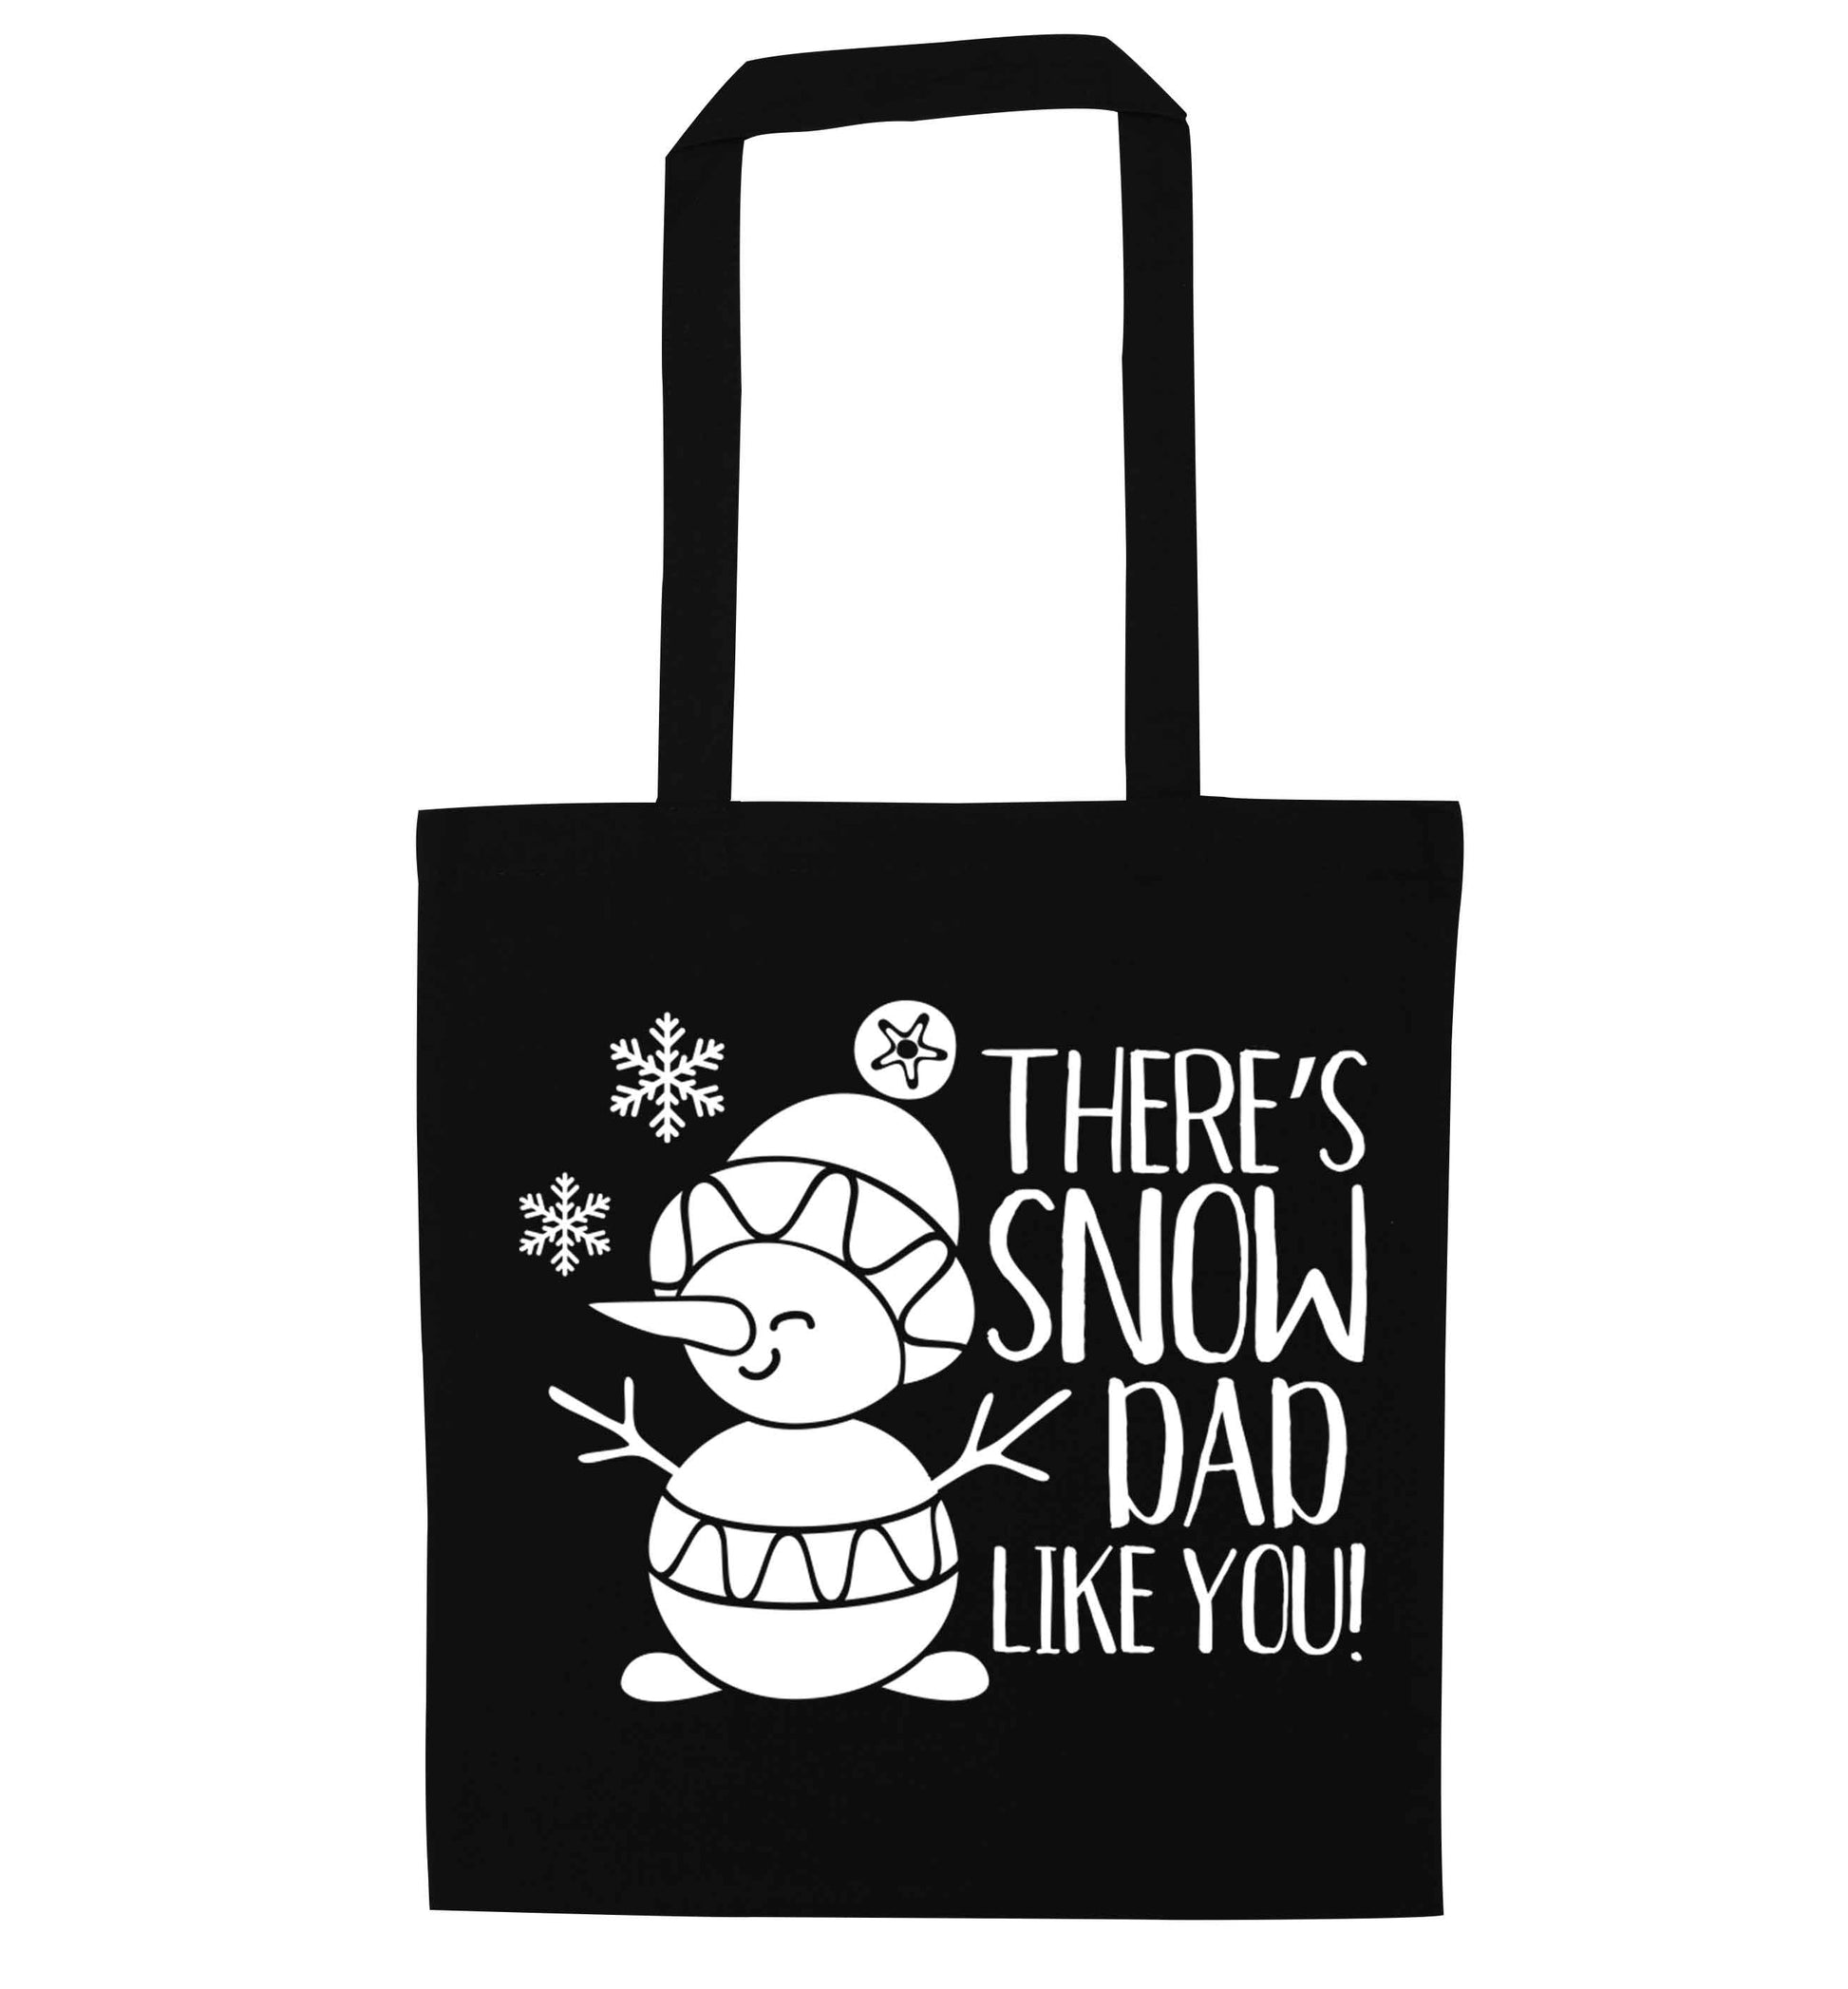 There's snow dad like you black tote bag